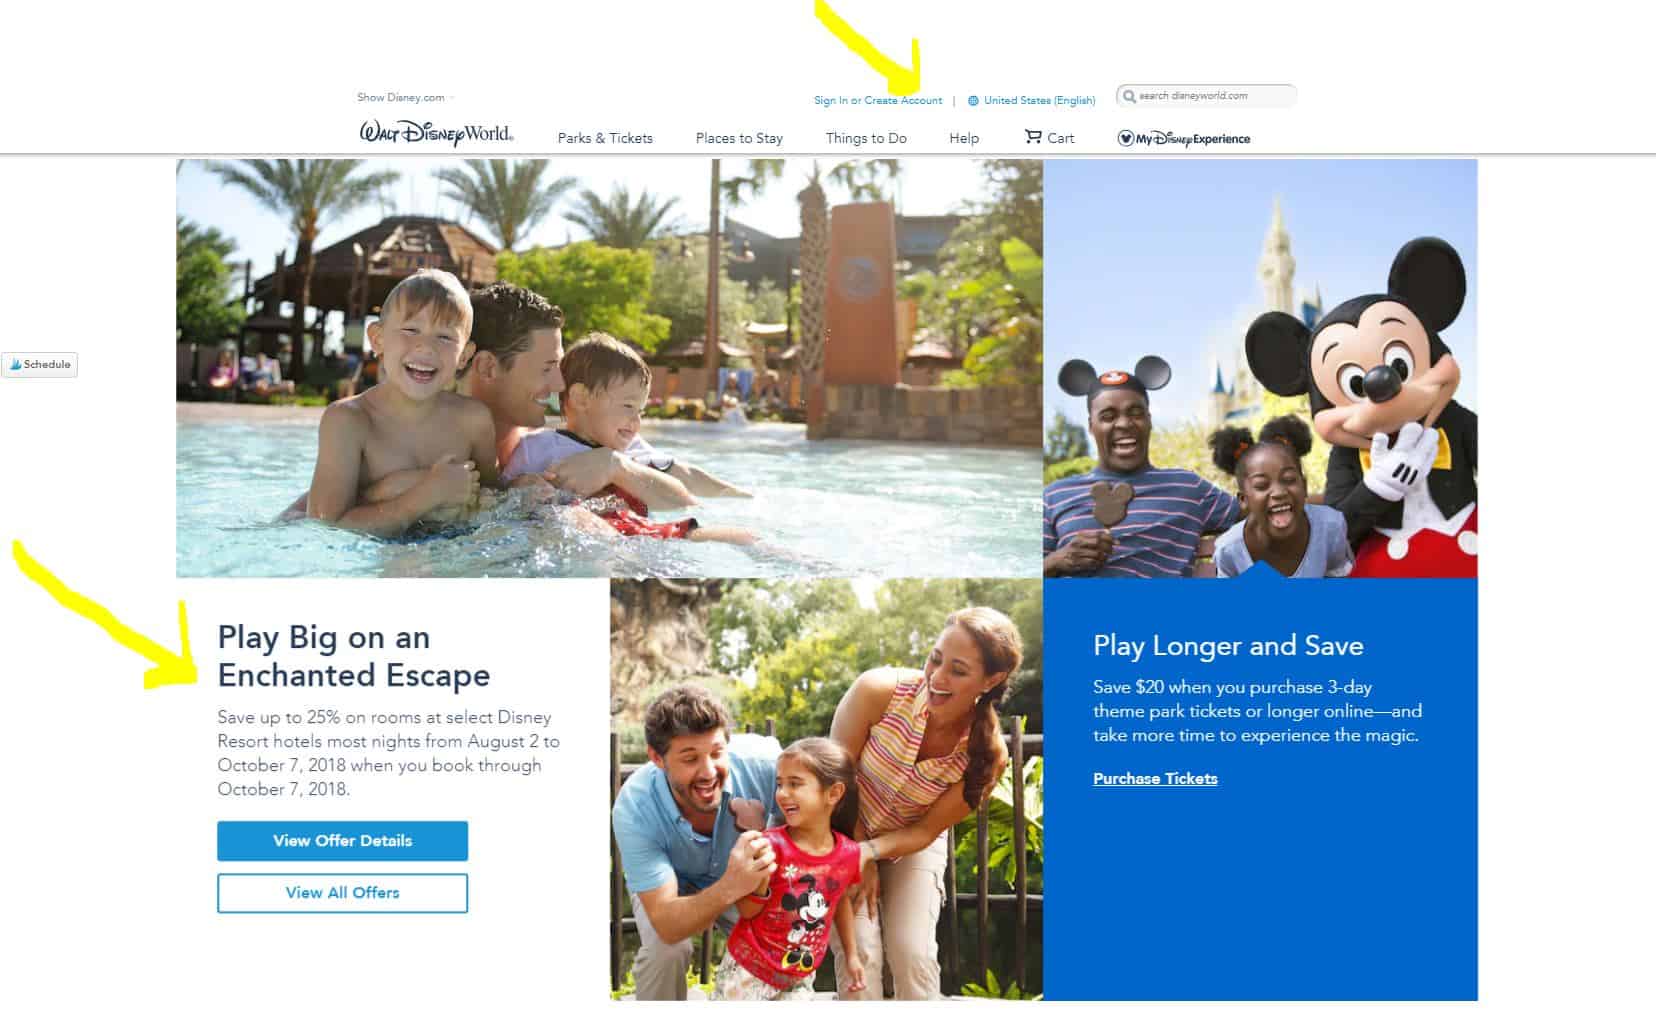 Scroll down the front page of the official WDW website and look for offers. Oh, and create an account while you're there. It may get you on the special offer list. First Time Disney World visit mistakes 